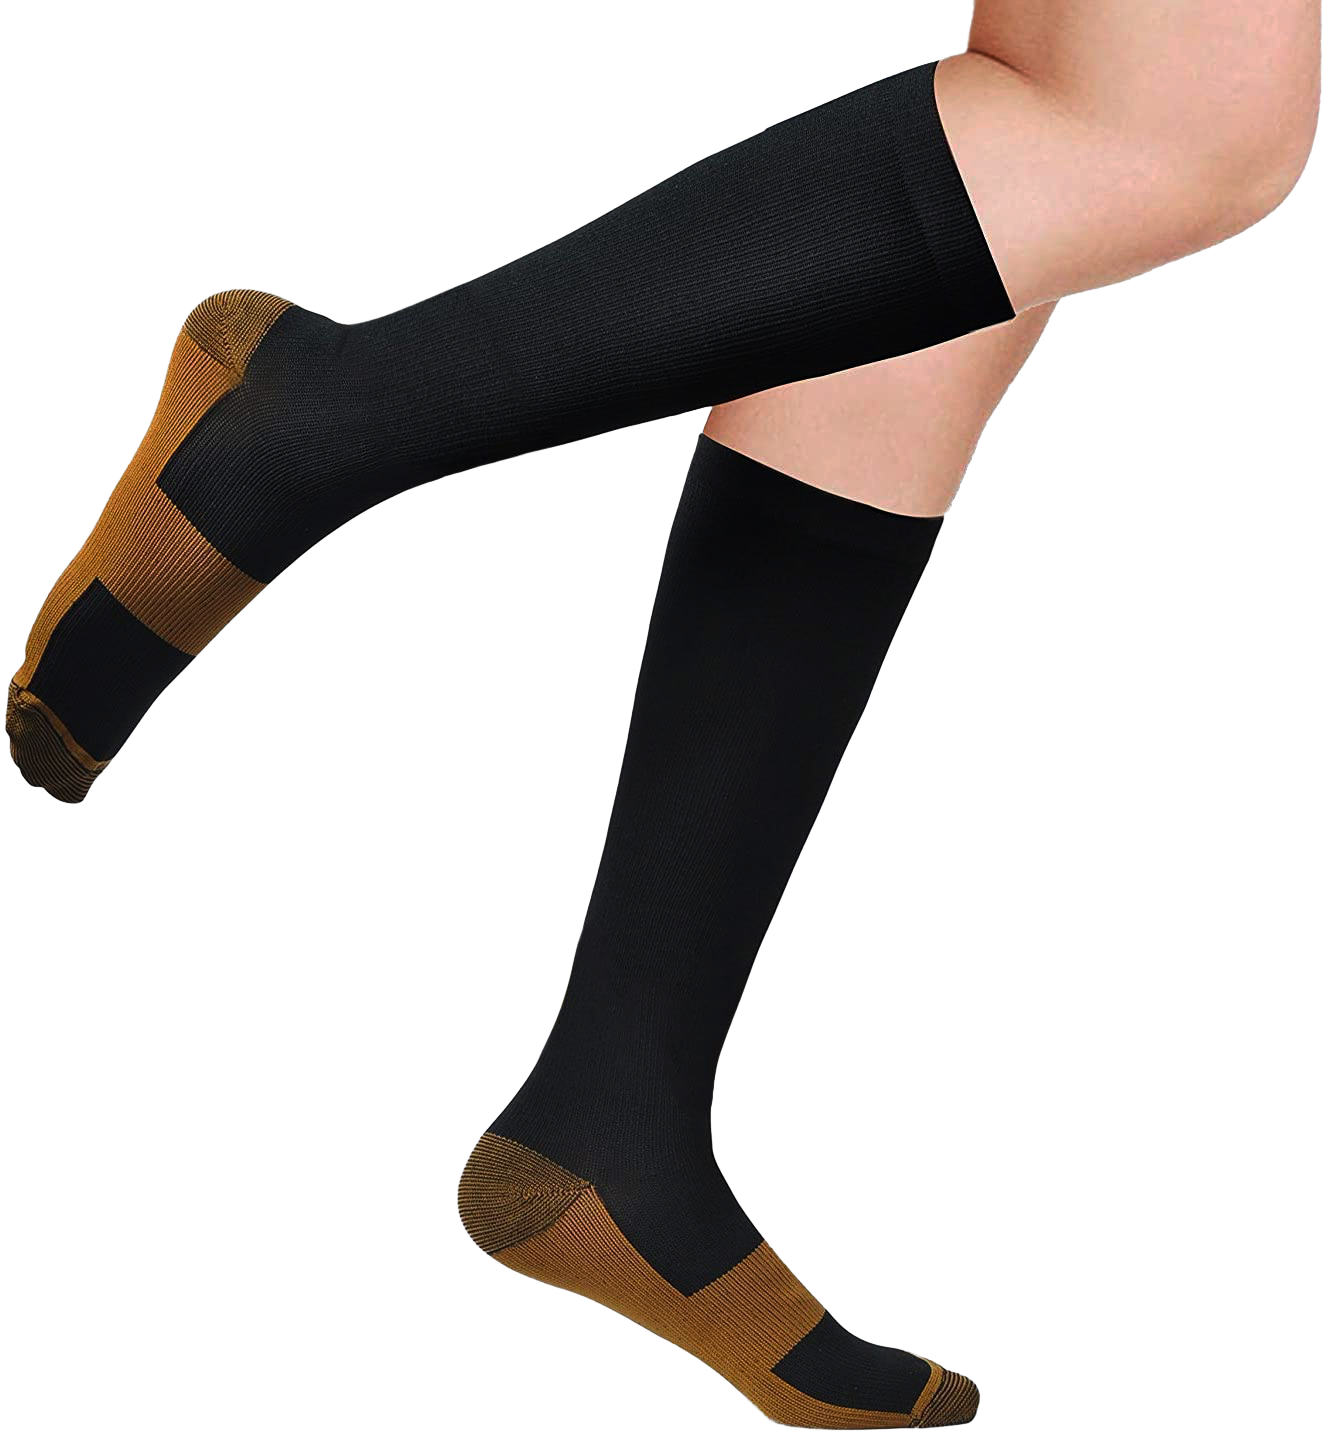 Antifungal copper compression socks with moisture-wicking antimicrobia ...